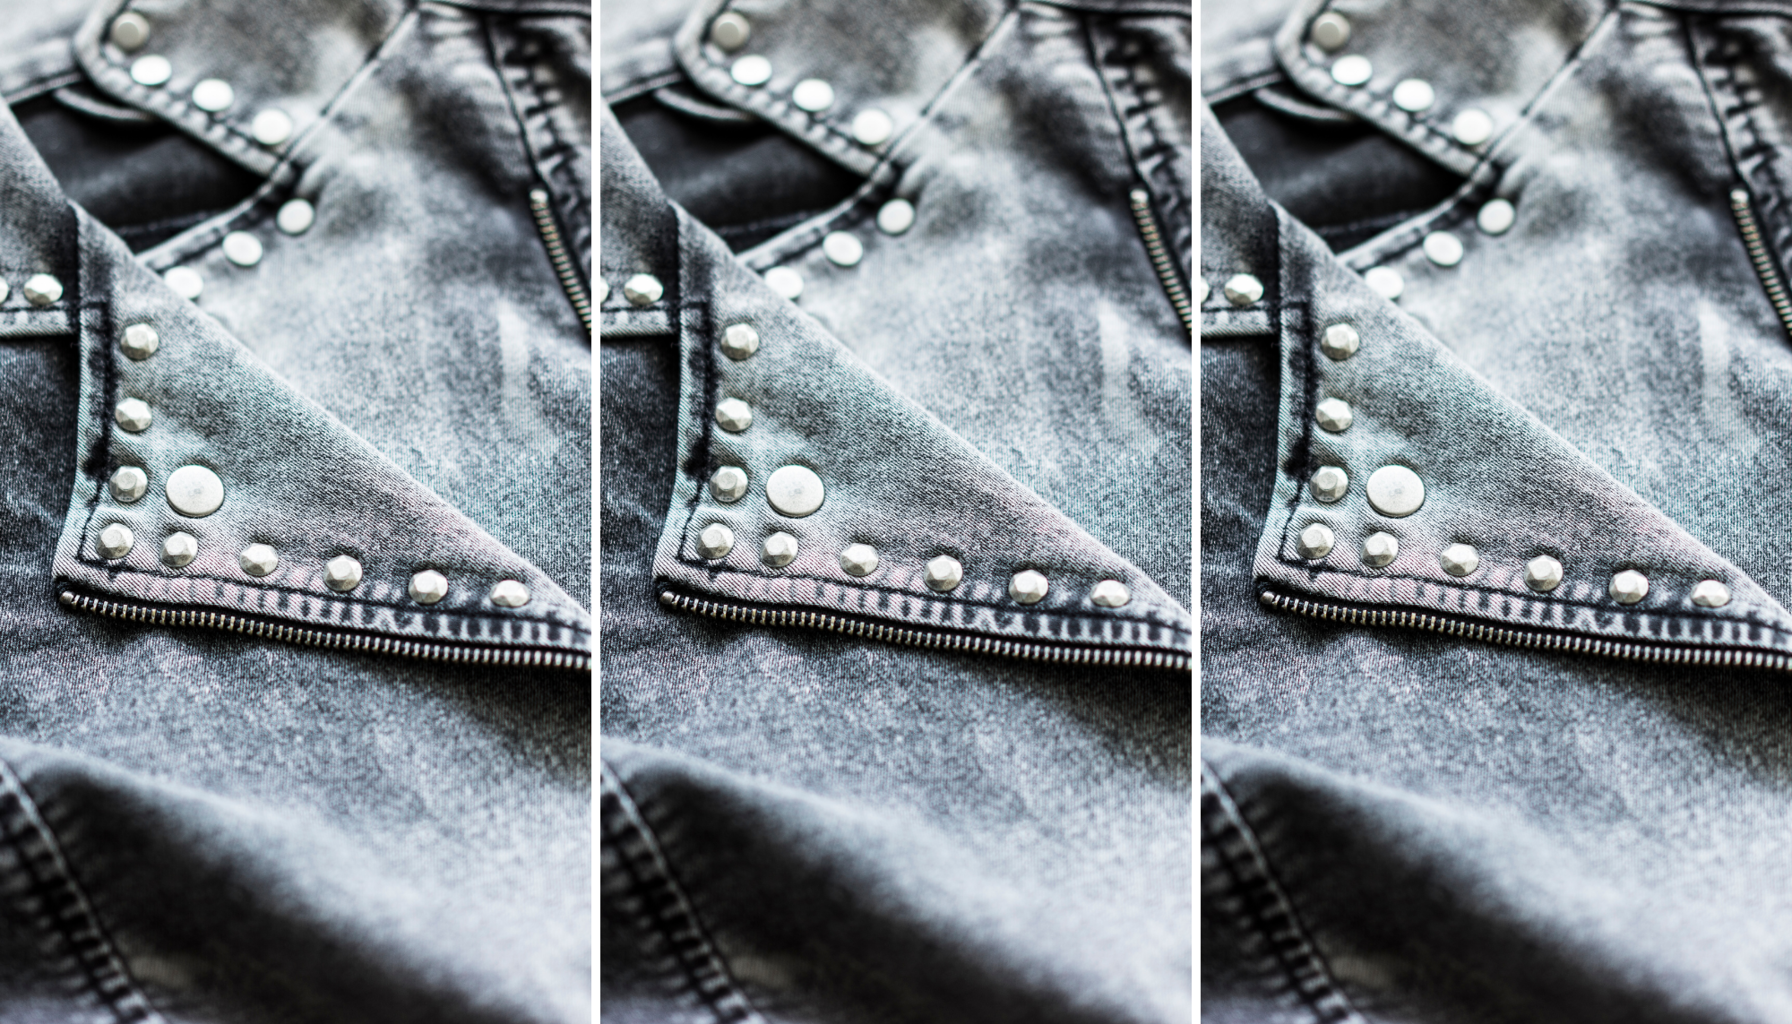 How to Mend Jean Holes in Cutest Way  Diy patches, Jeans diy, Sewing hacks